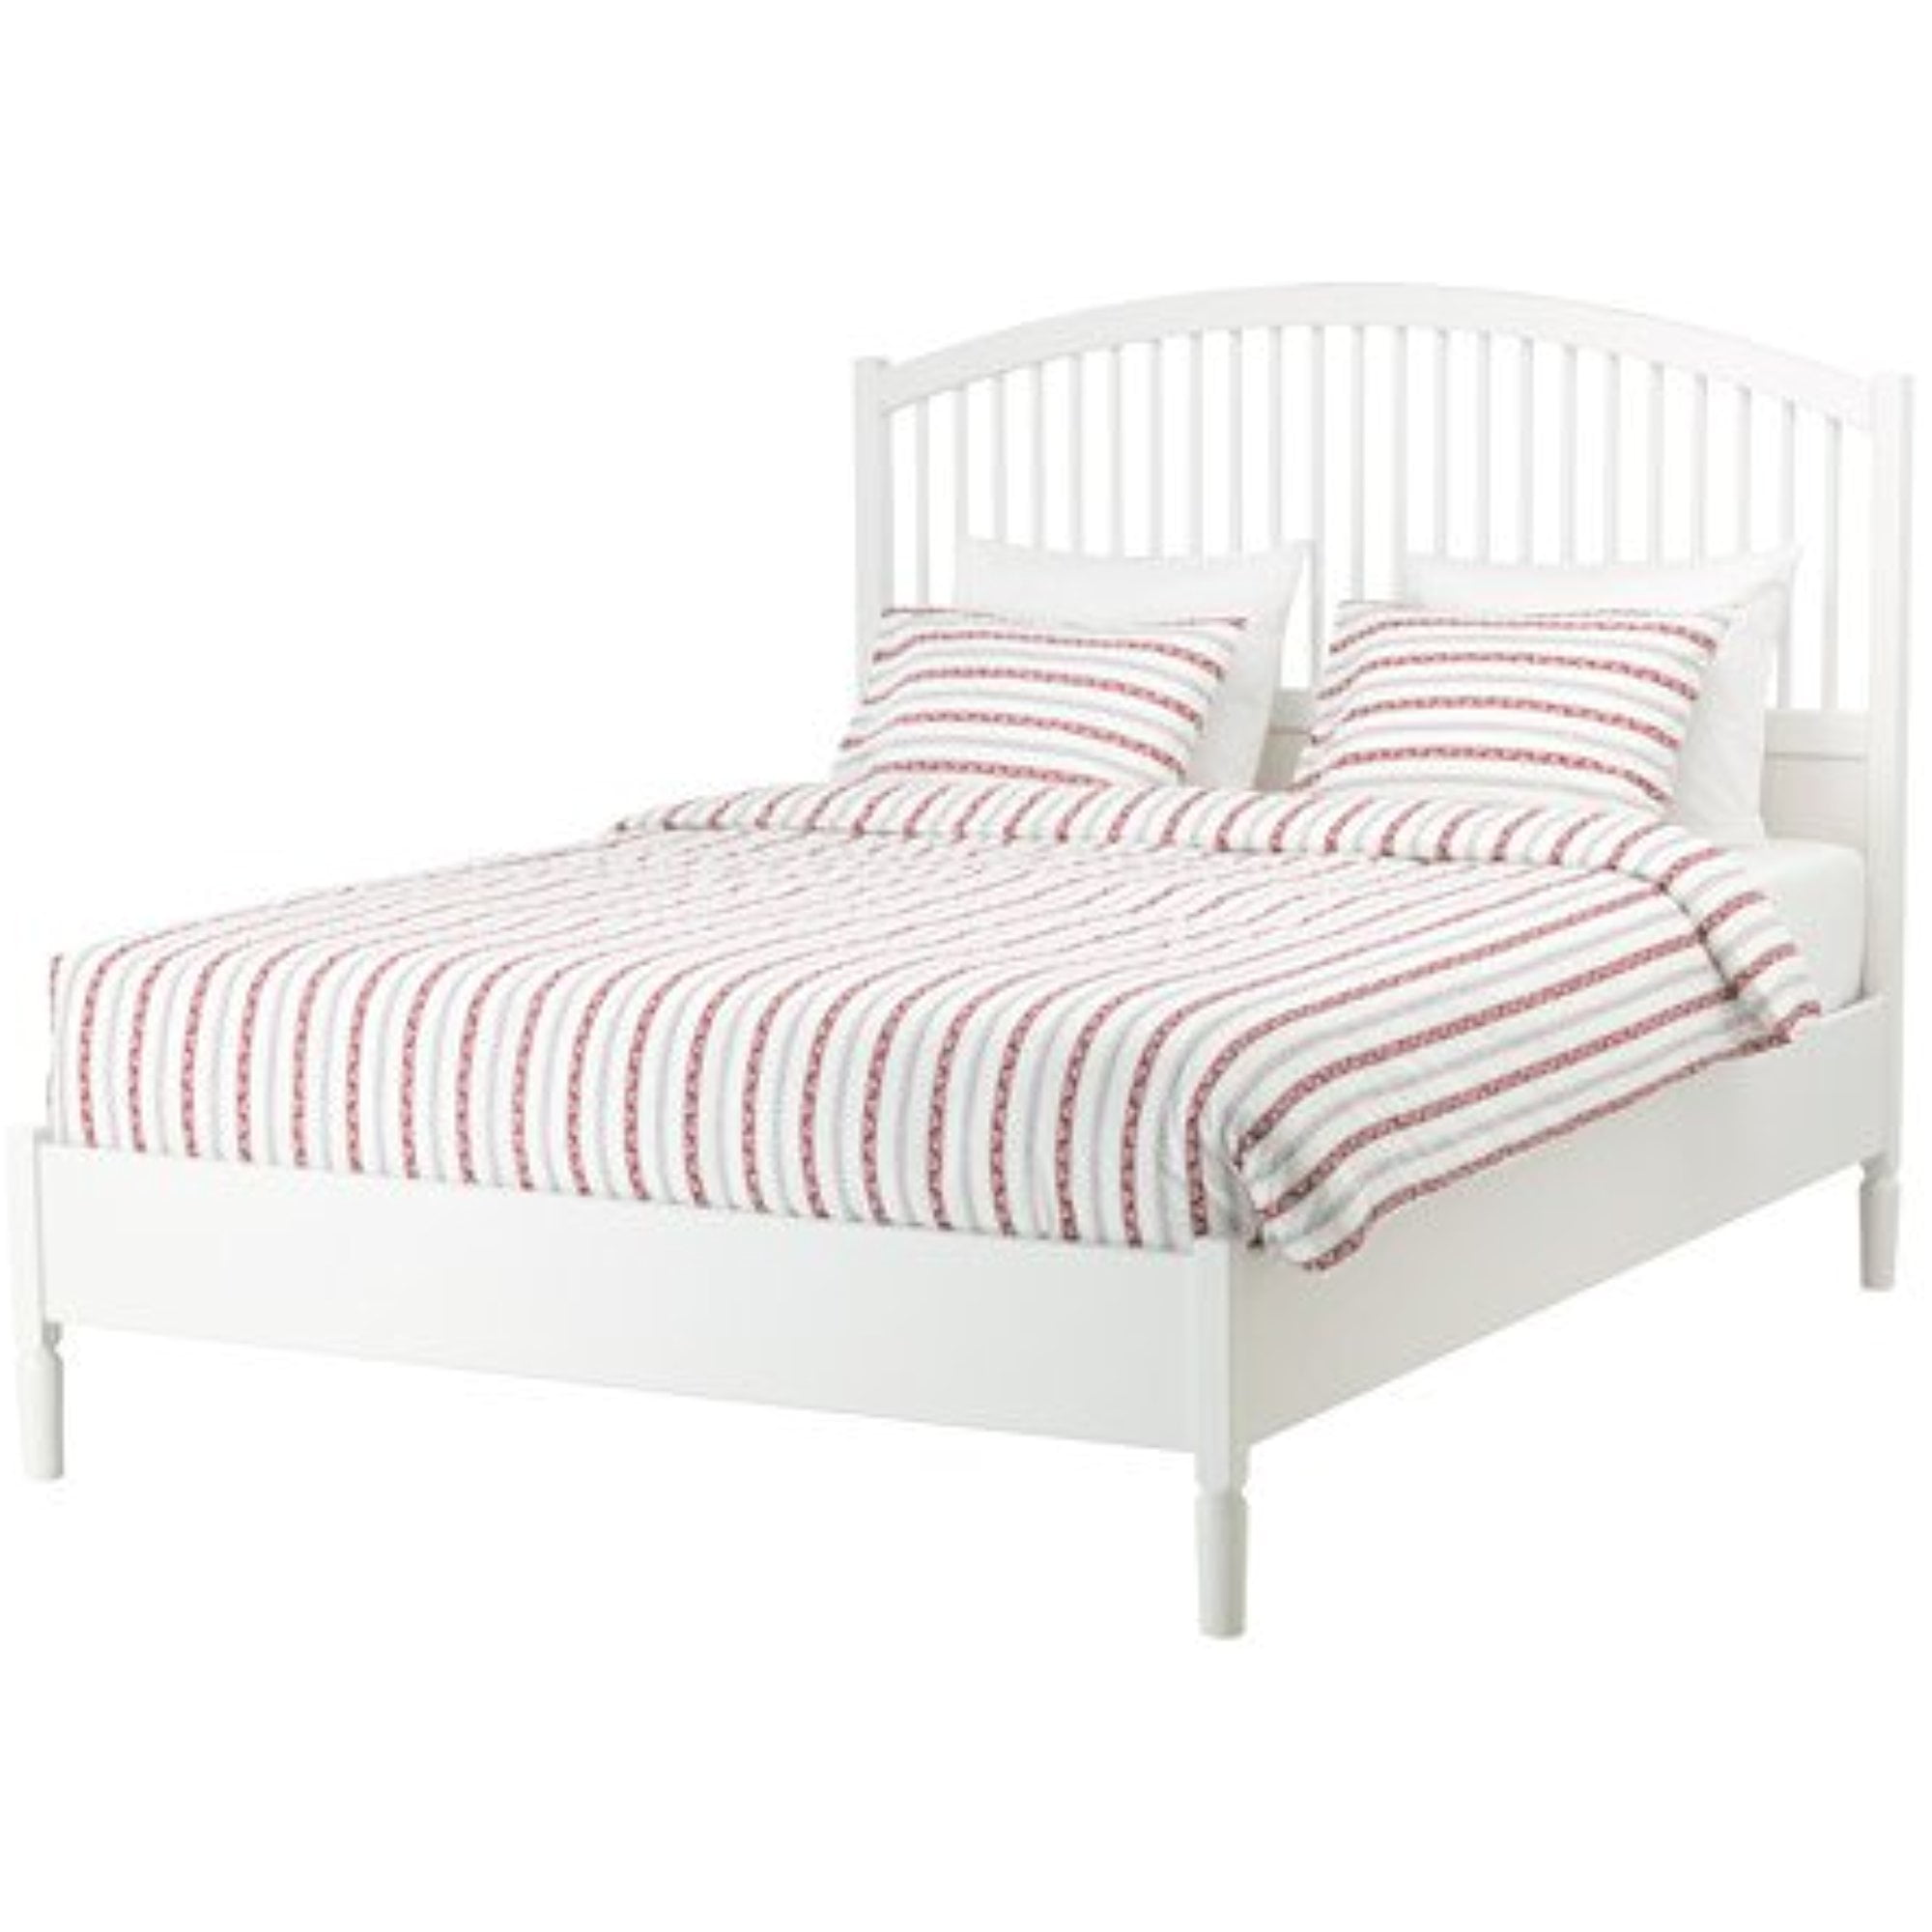 Ikea Bed Frame White King Size 30382, Does Ikea Carry California King Bed Frames